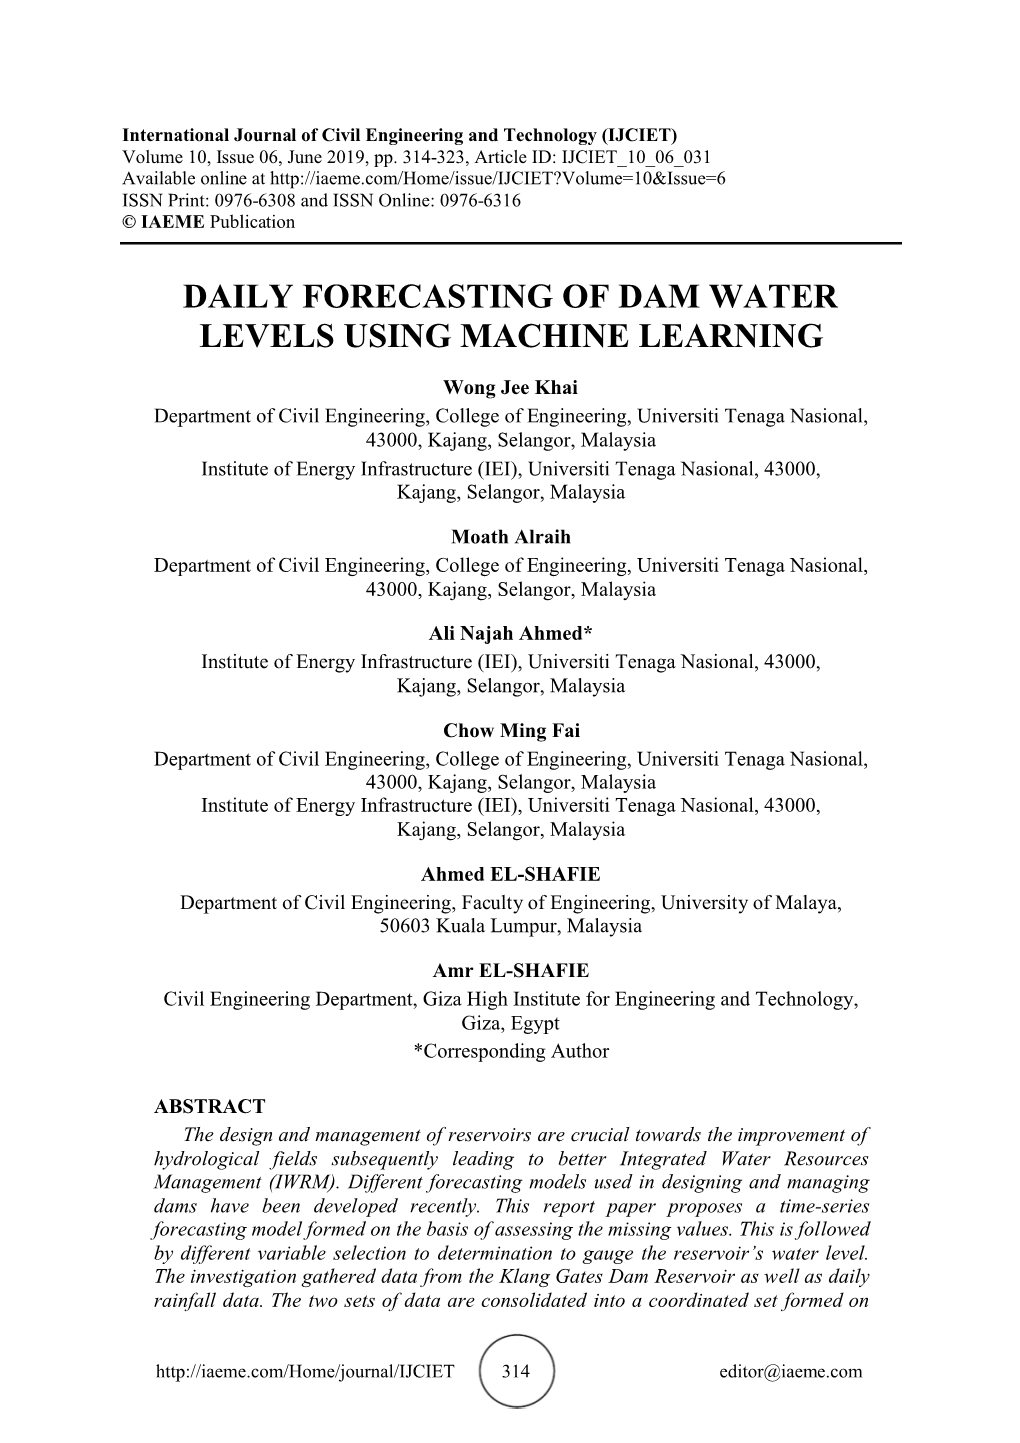 Daily Forecasting of Dam Water Levels Using Machine Learning